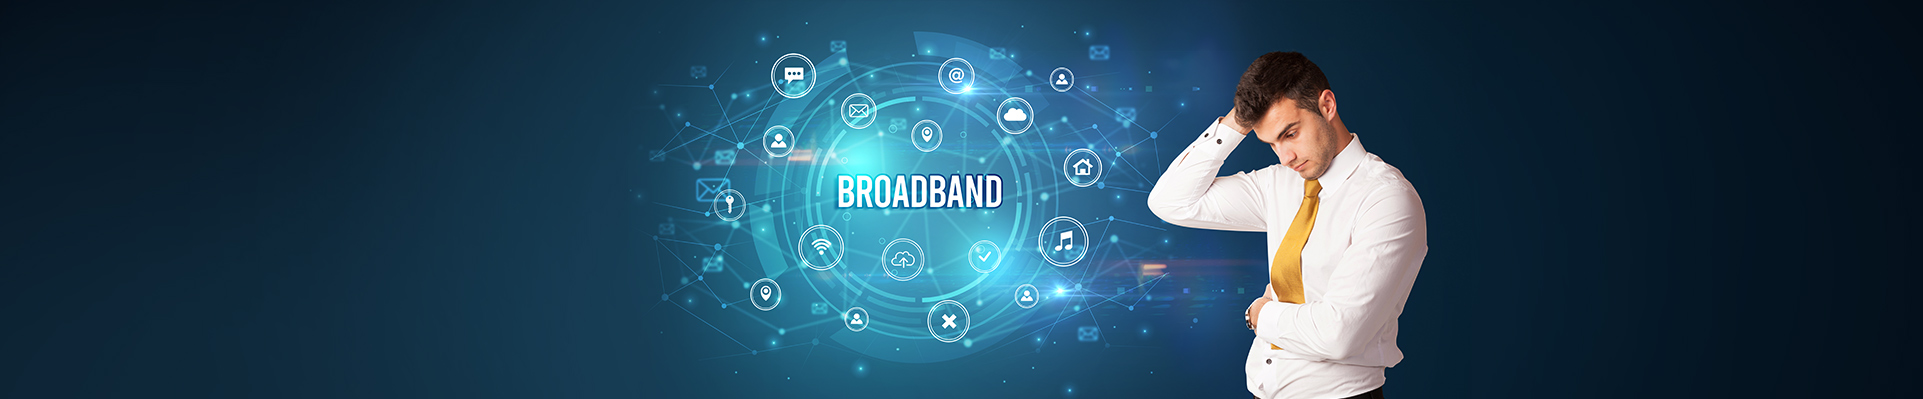 Advantages Of Internet Leased Lines Over Broadband